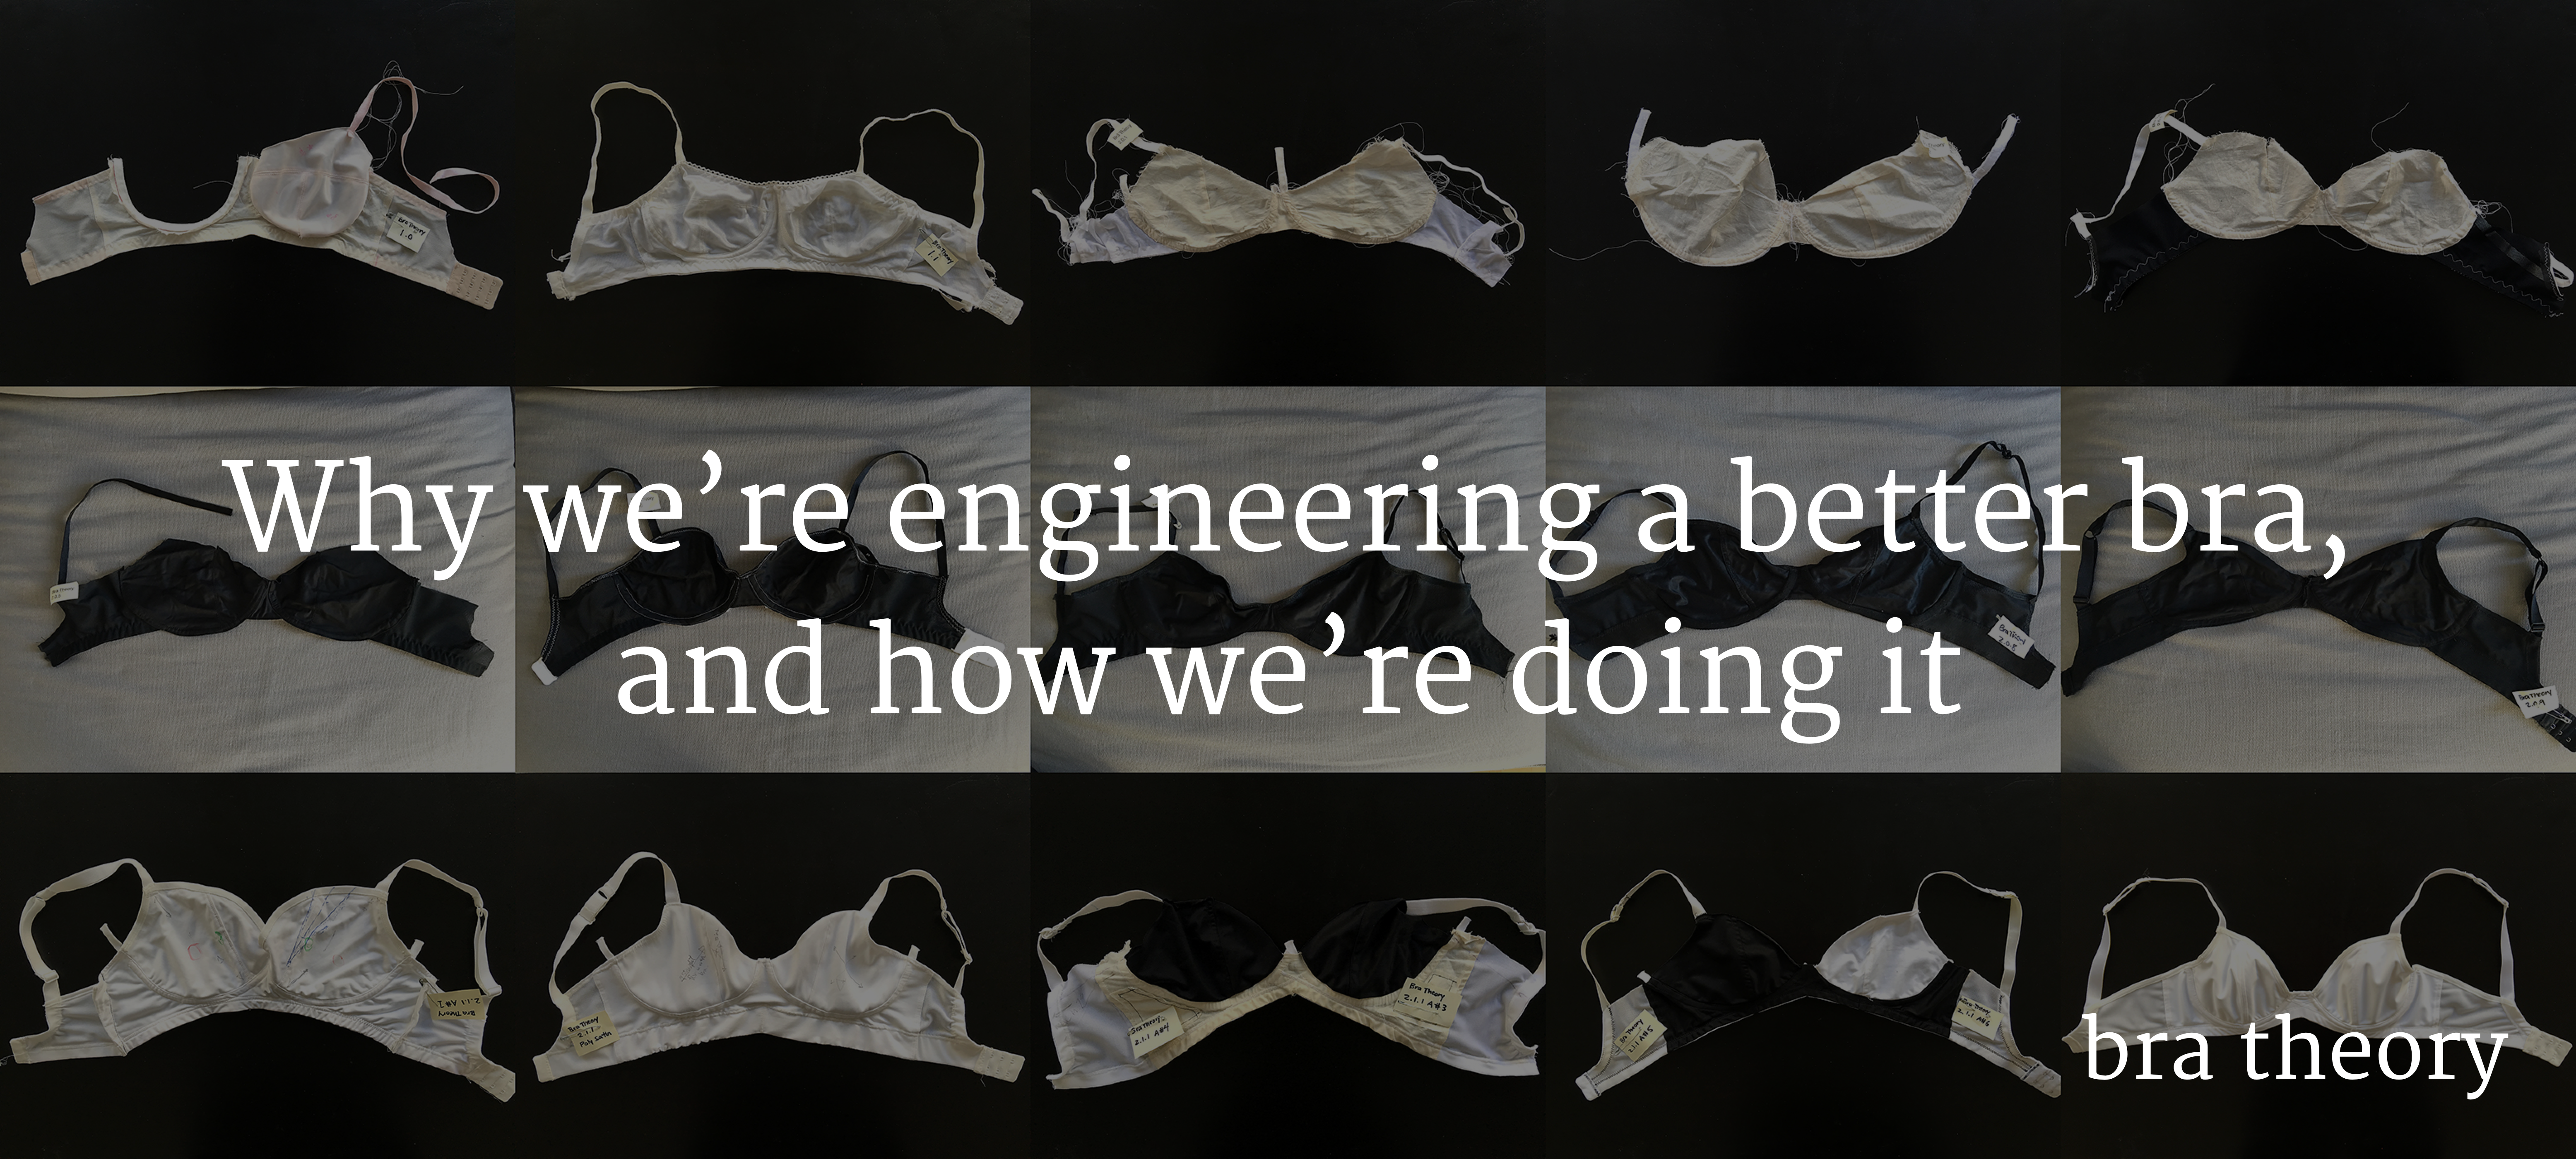 Why we're engineering a better bra, and how we're doing it